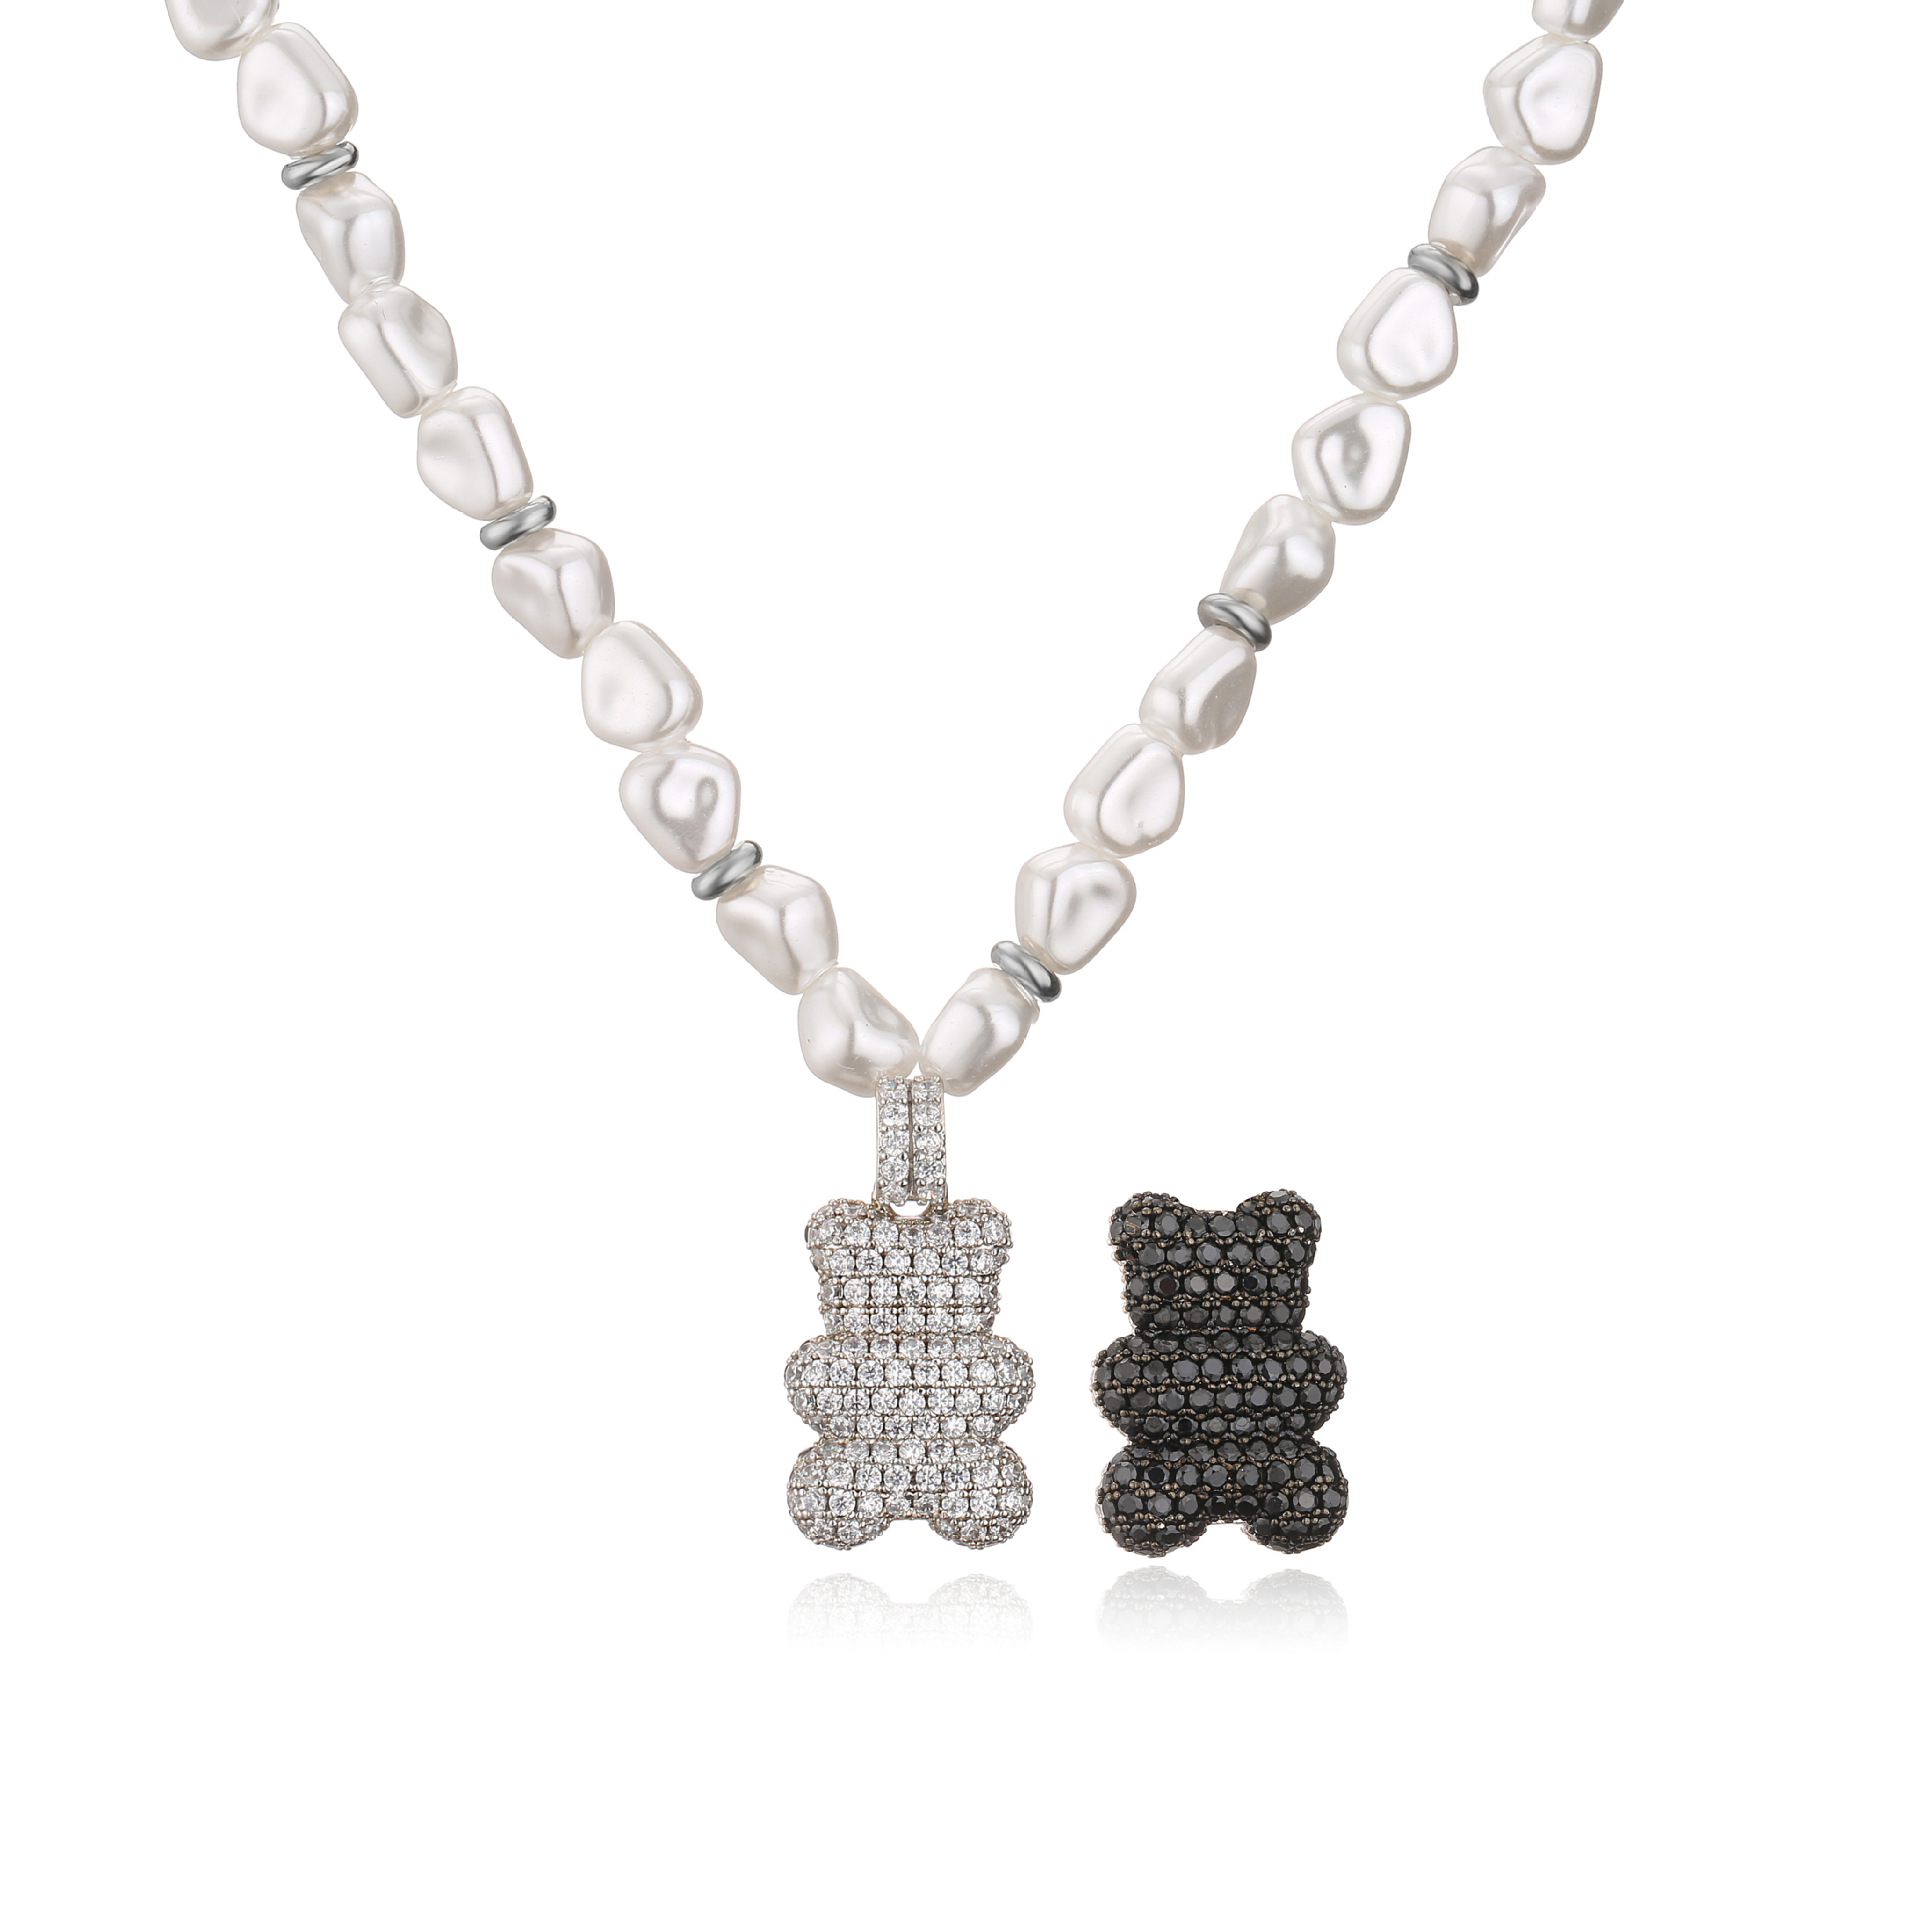 Black and white bear pearl necklace